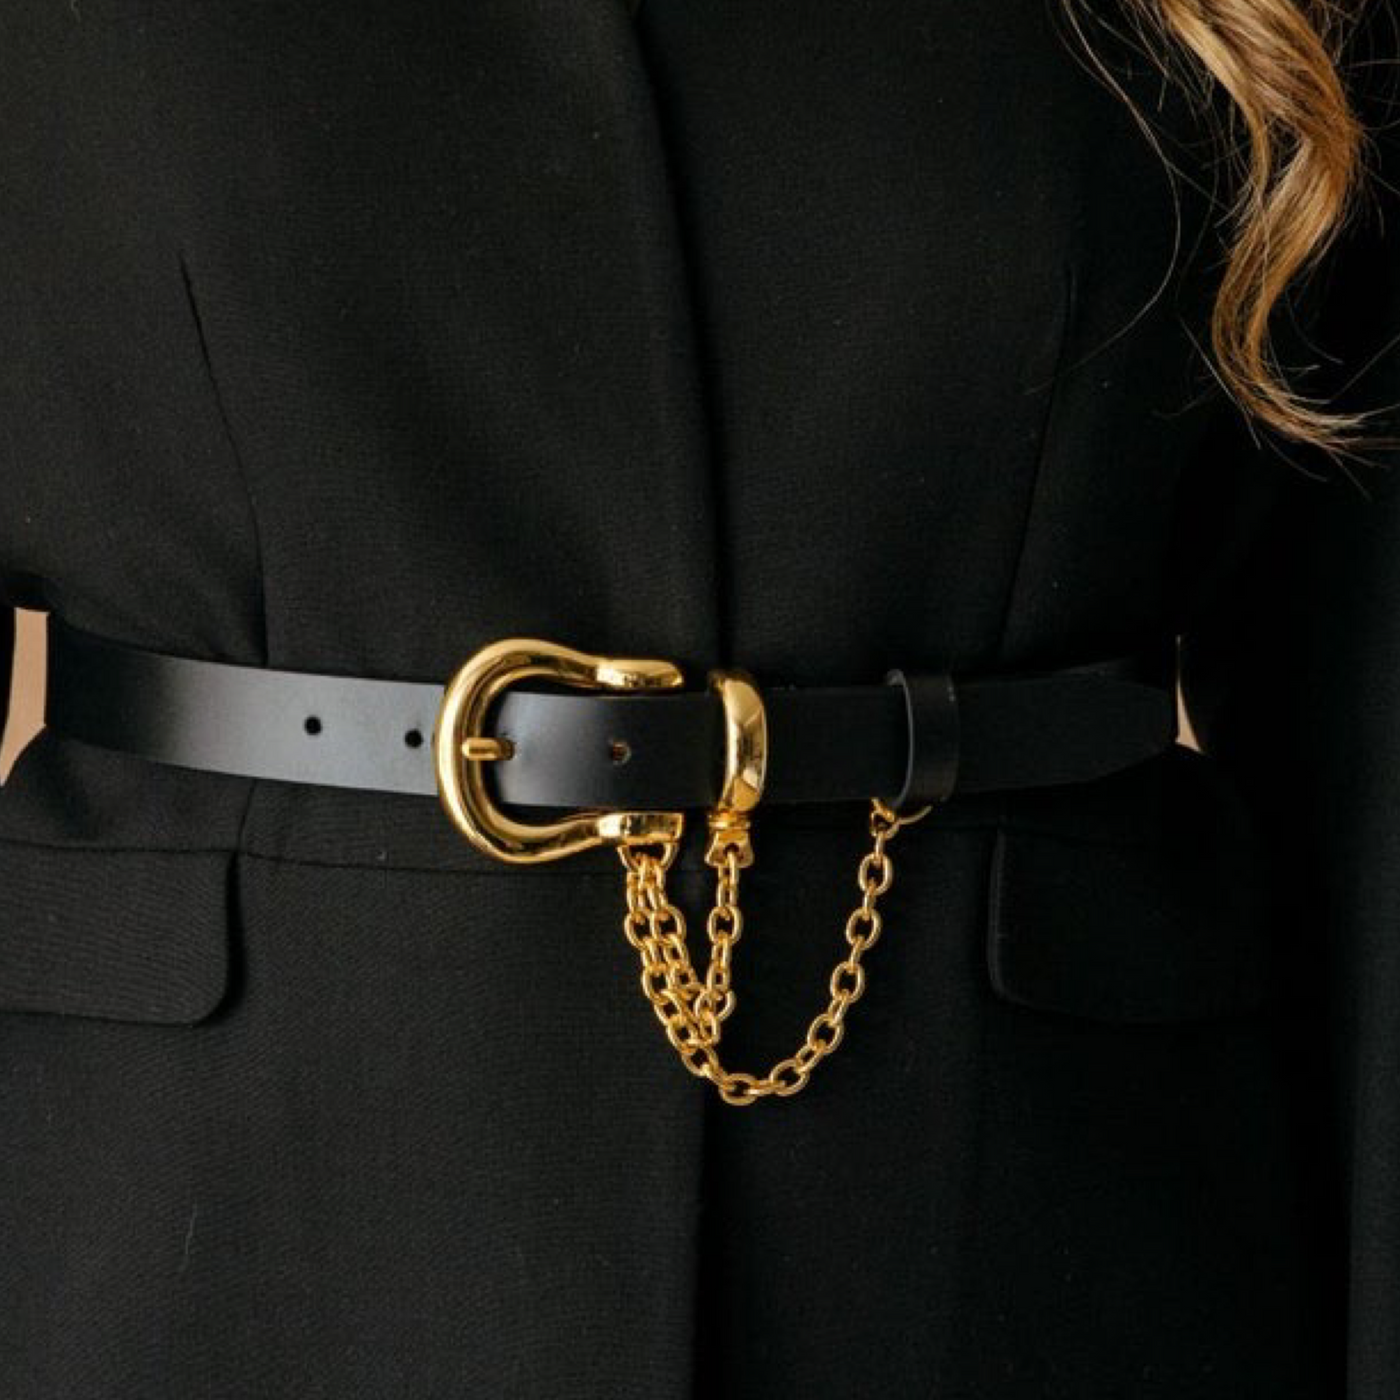 Buckle Belt with Chain Black Gold